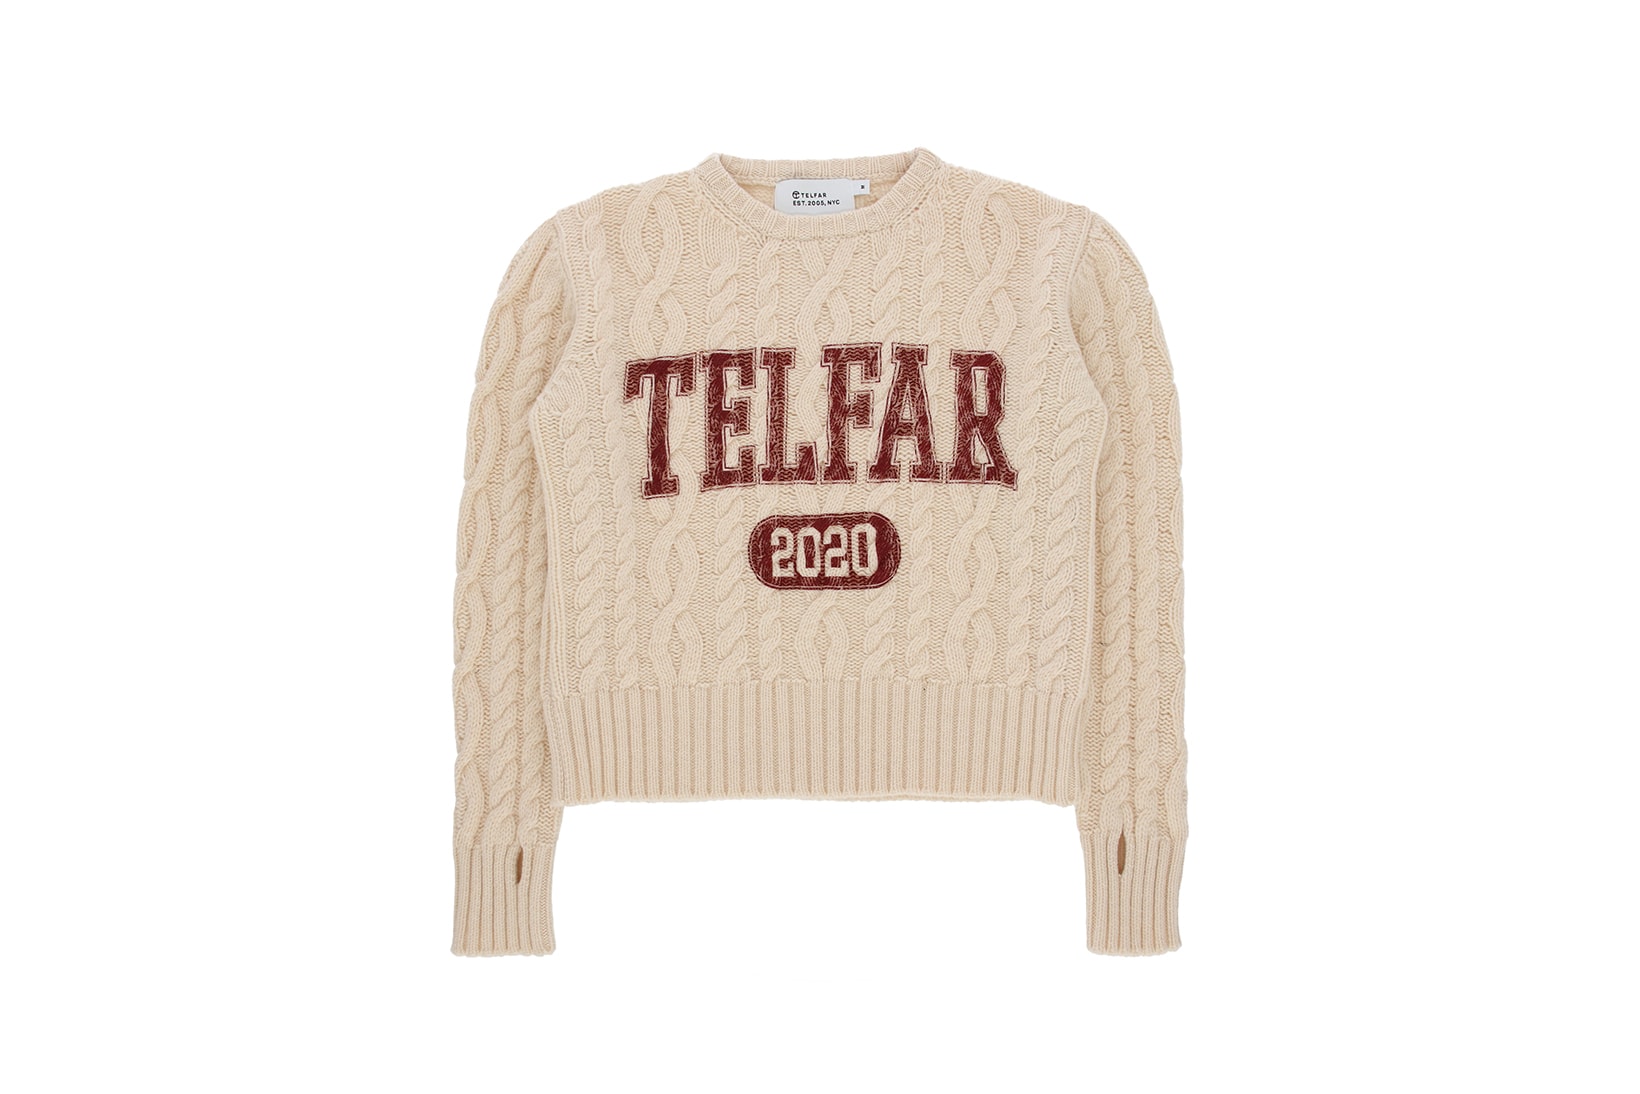 telfar cable knit knitwear thumbhole sweater winter apparel off white white red